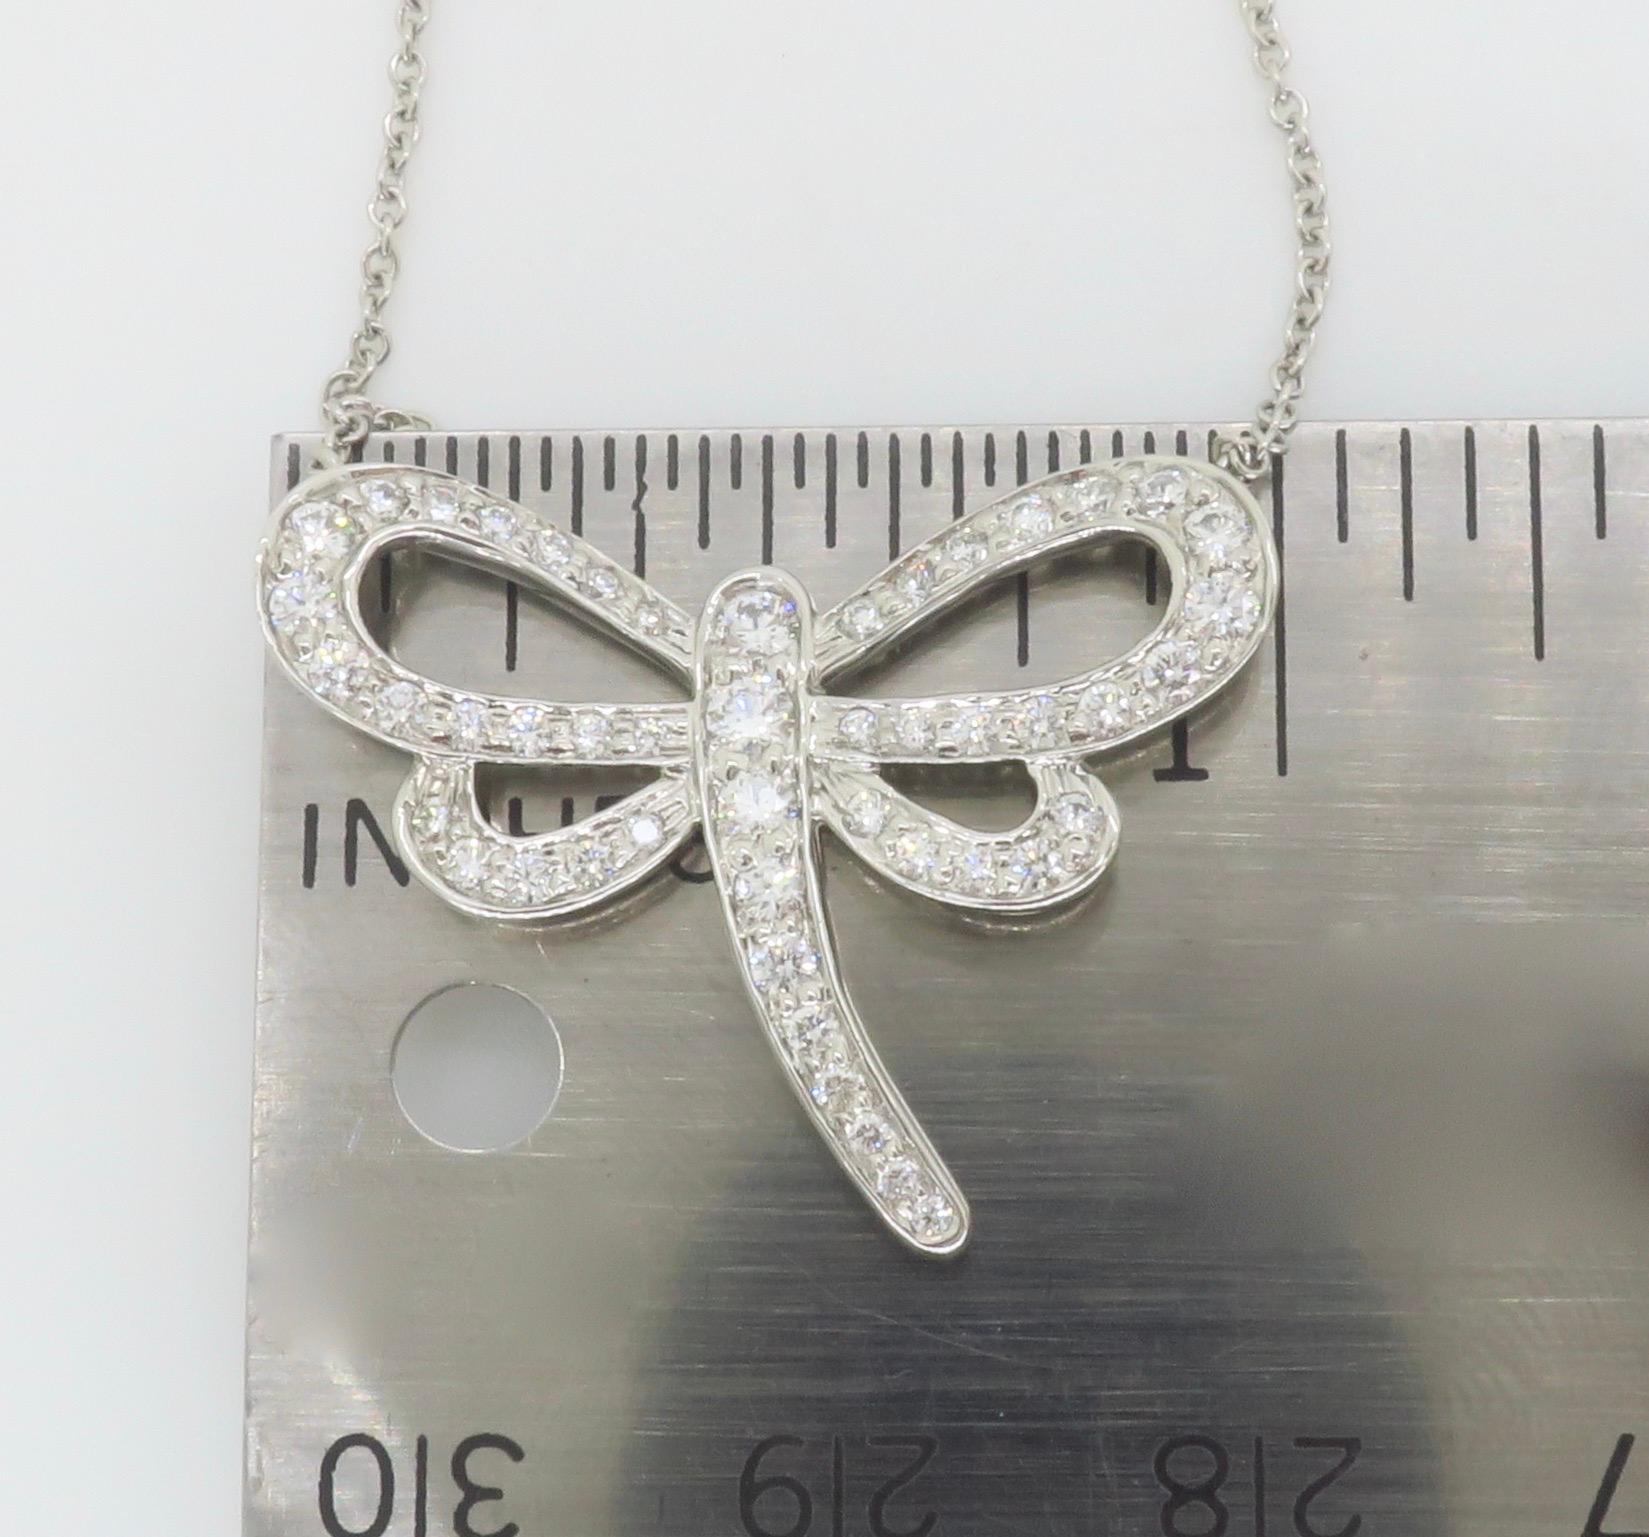 Rare Tiffany & Co. Diamond Dragonfly Necklace made in Platinum  4